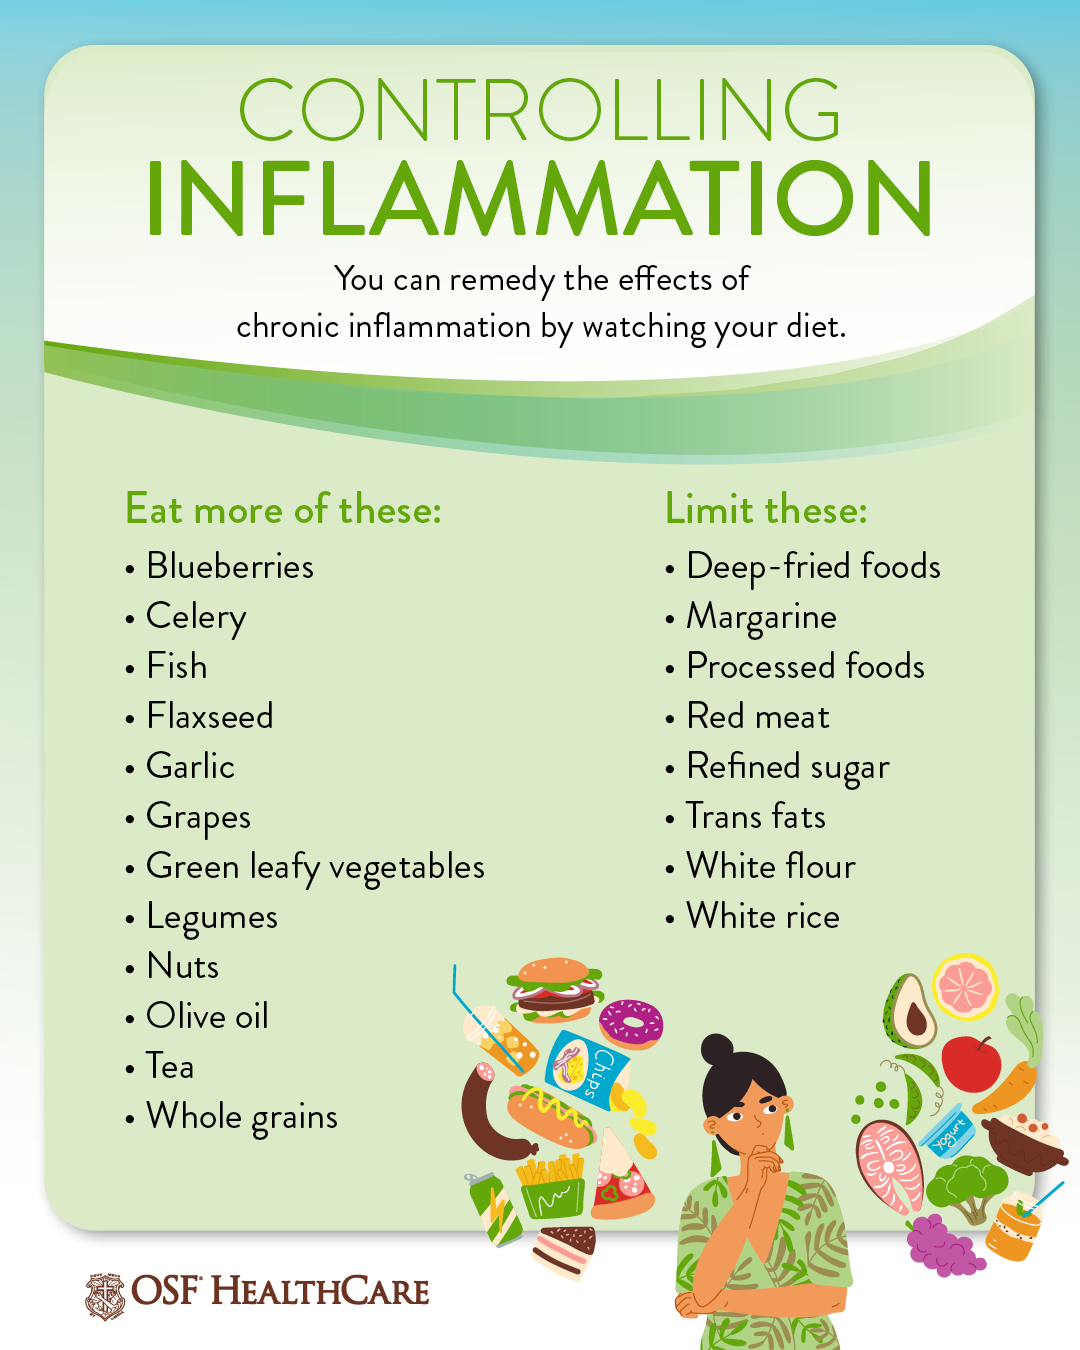 Chronic inflammation causes